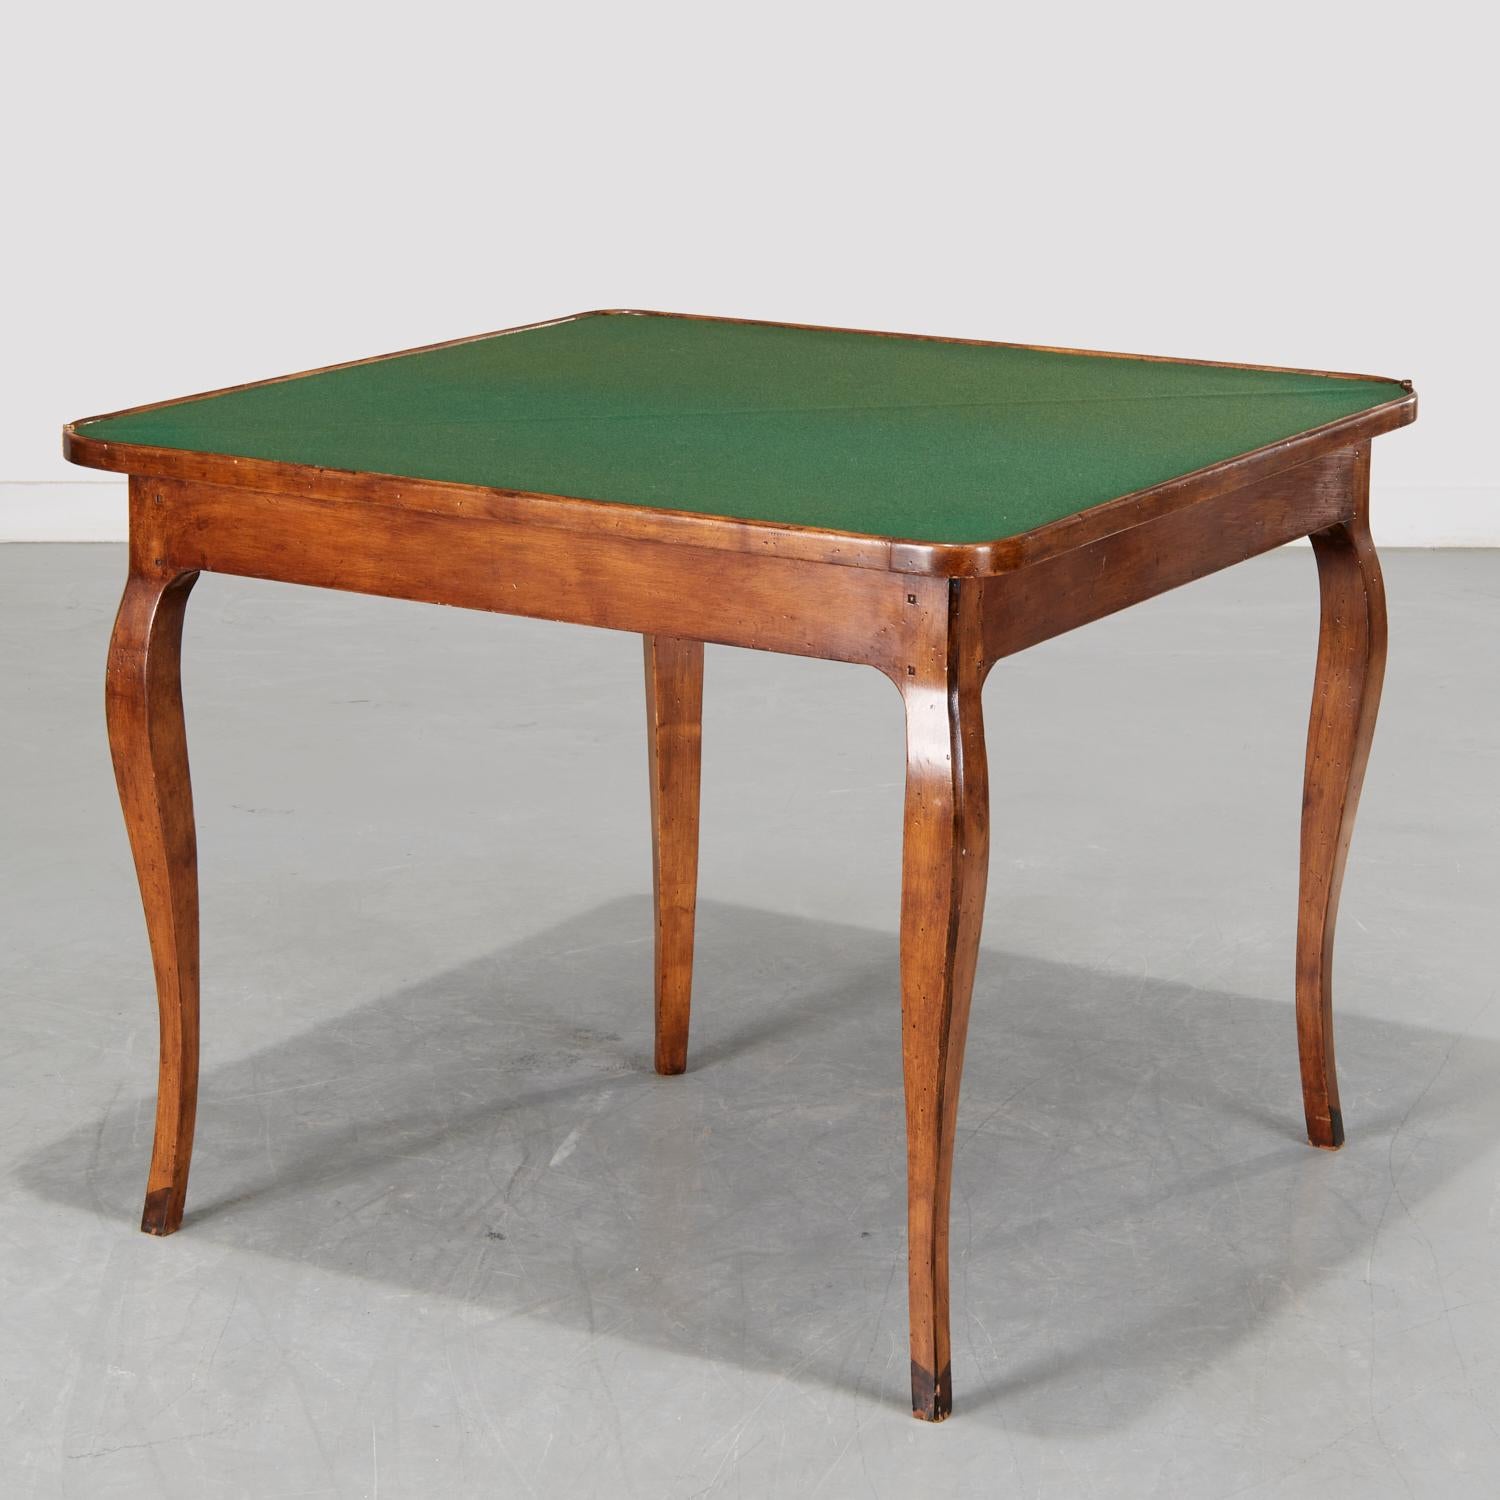 20th c., French Provincial Louis XV style triangular corner games table with a hinged top opening to a green baize gaming surface. The table folds out to a square on four curved corner legs. When folder. the middle rear leg becomes a  concealed